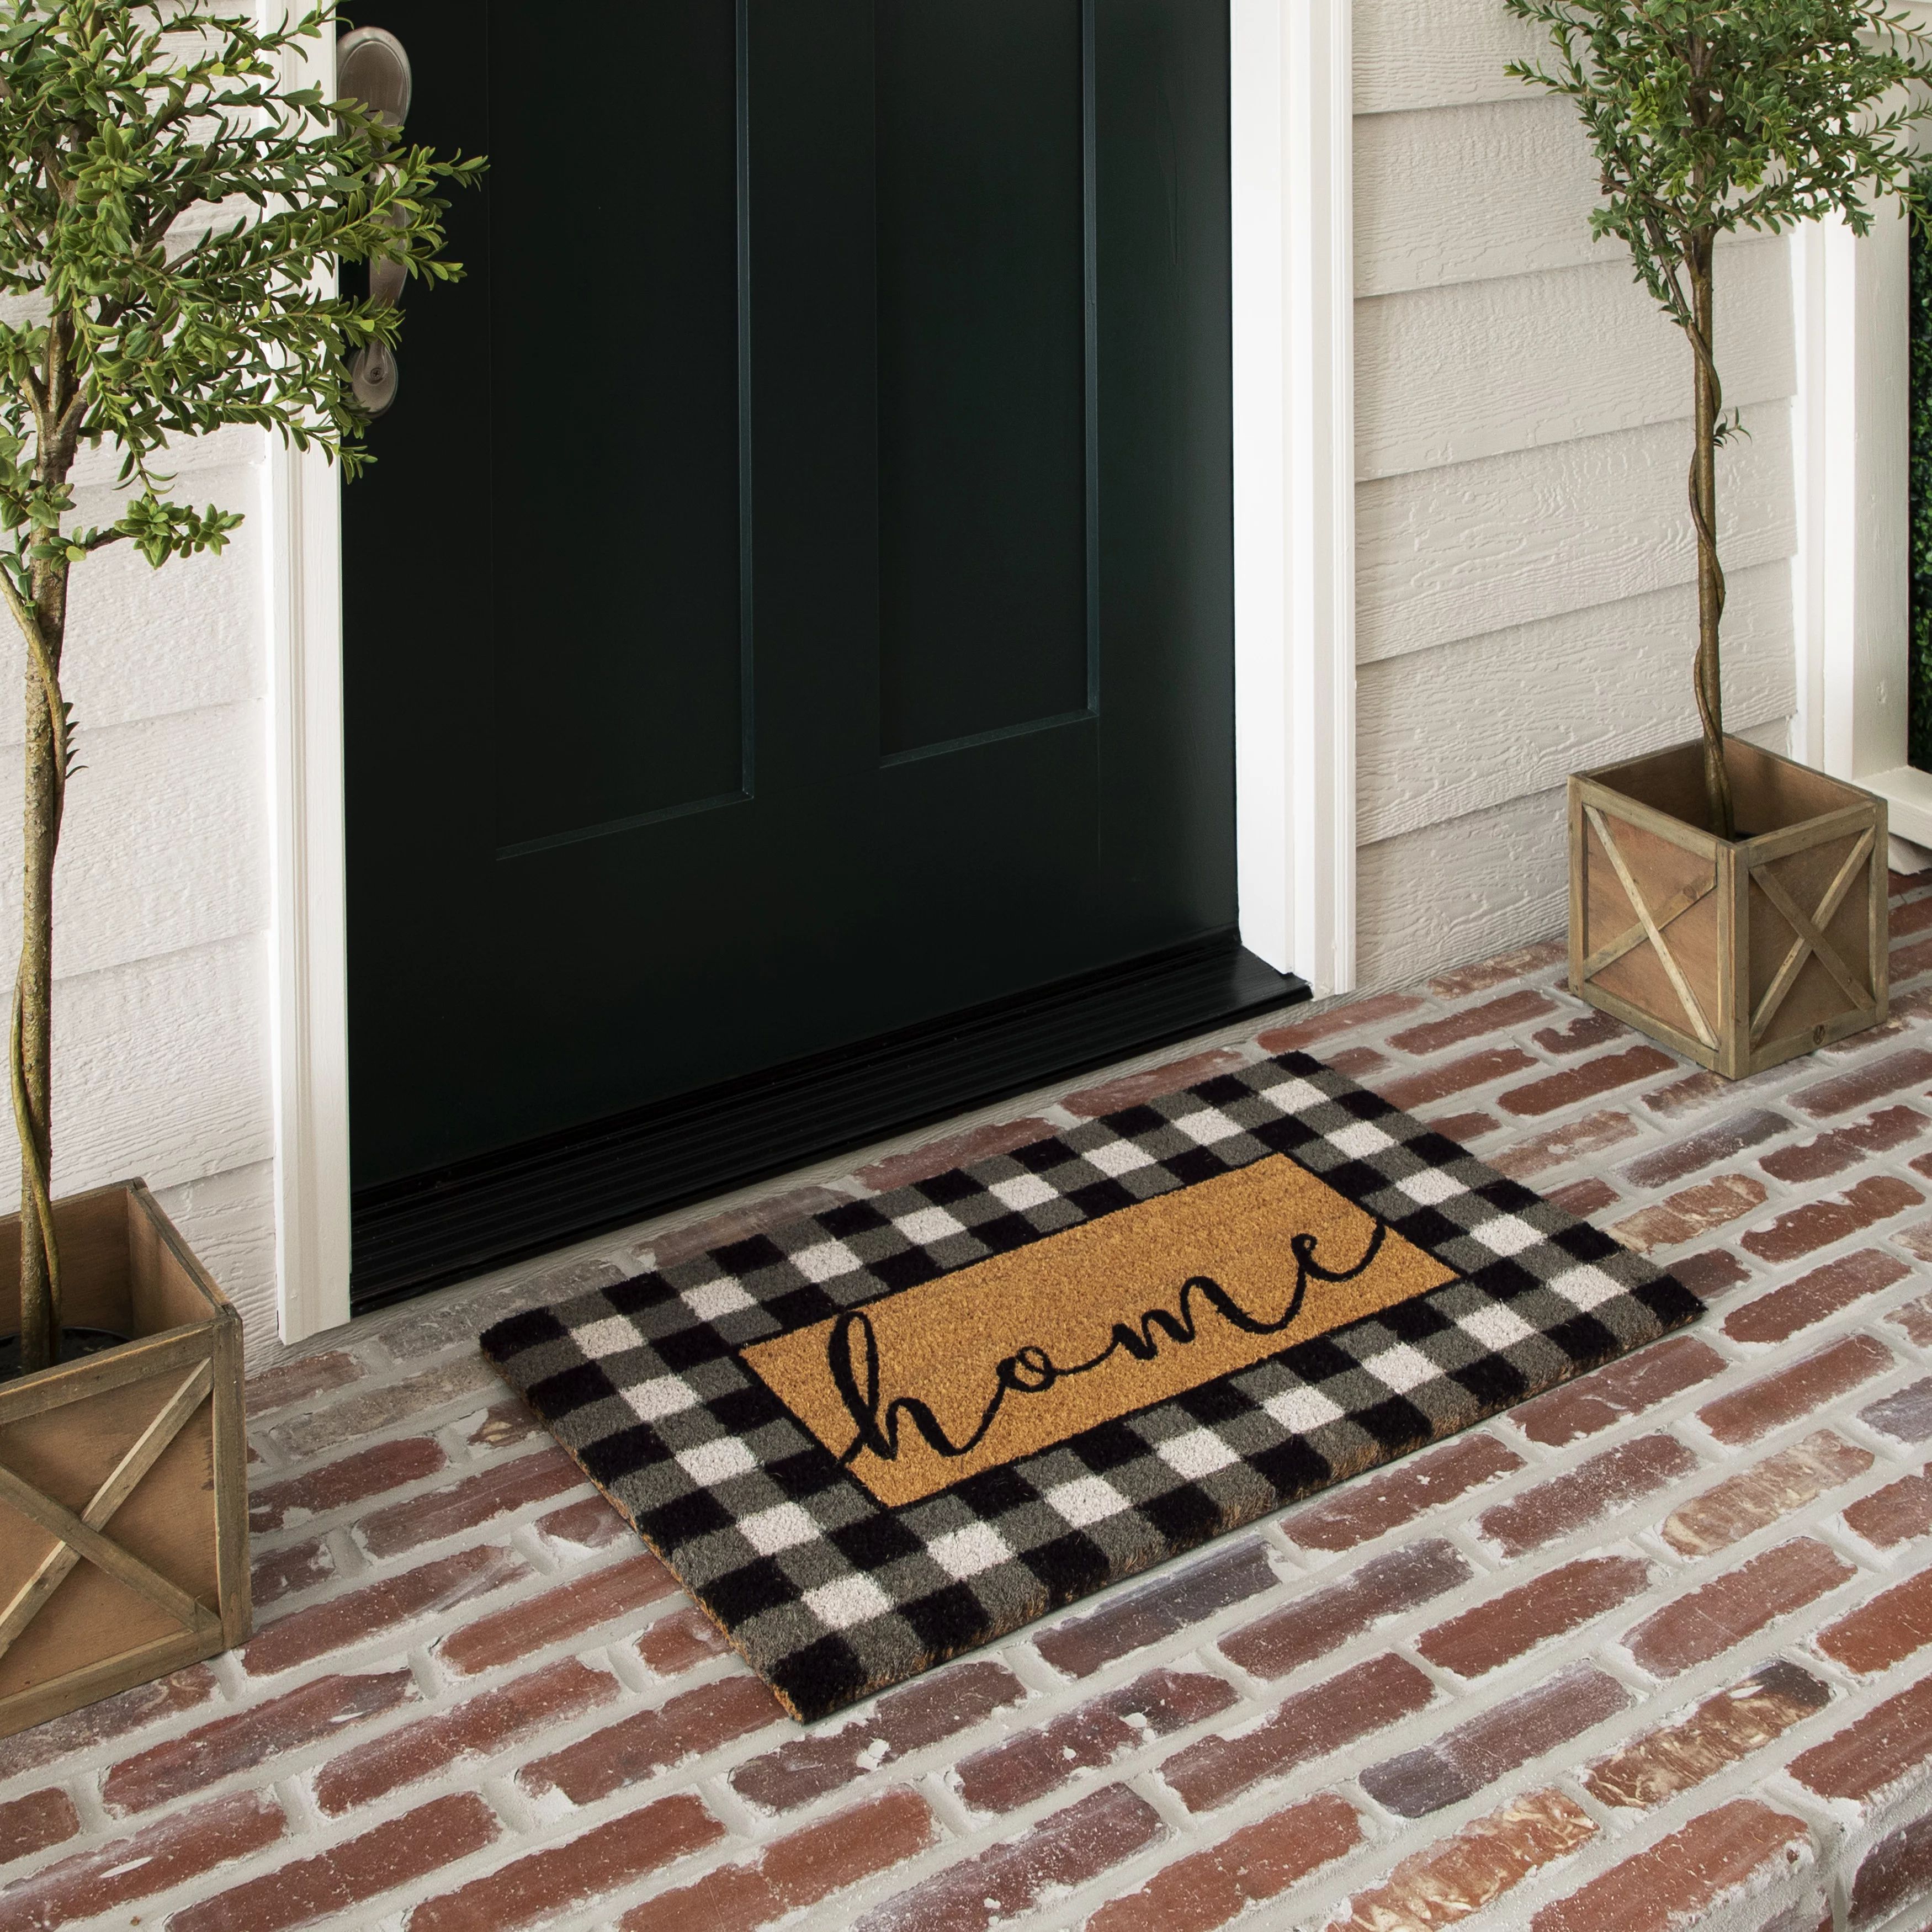 Mainstays Home Plaid Black and White Farmhouse Outdoor Doormat, Black and White, 18' x 30' | Walmart (US)